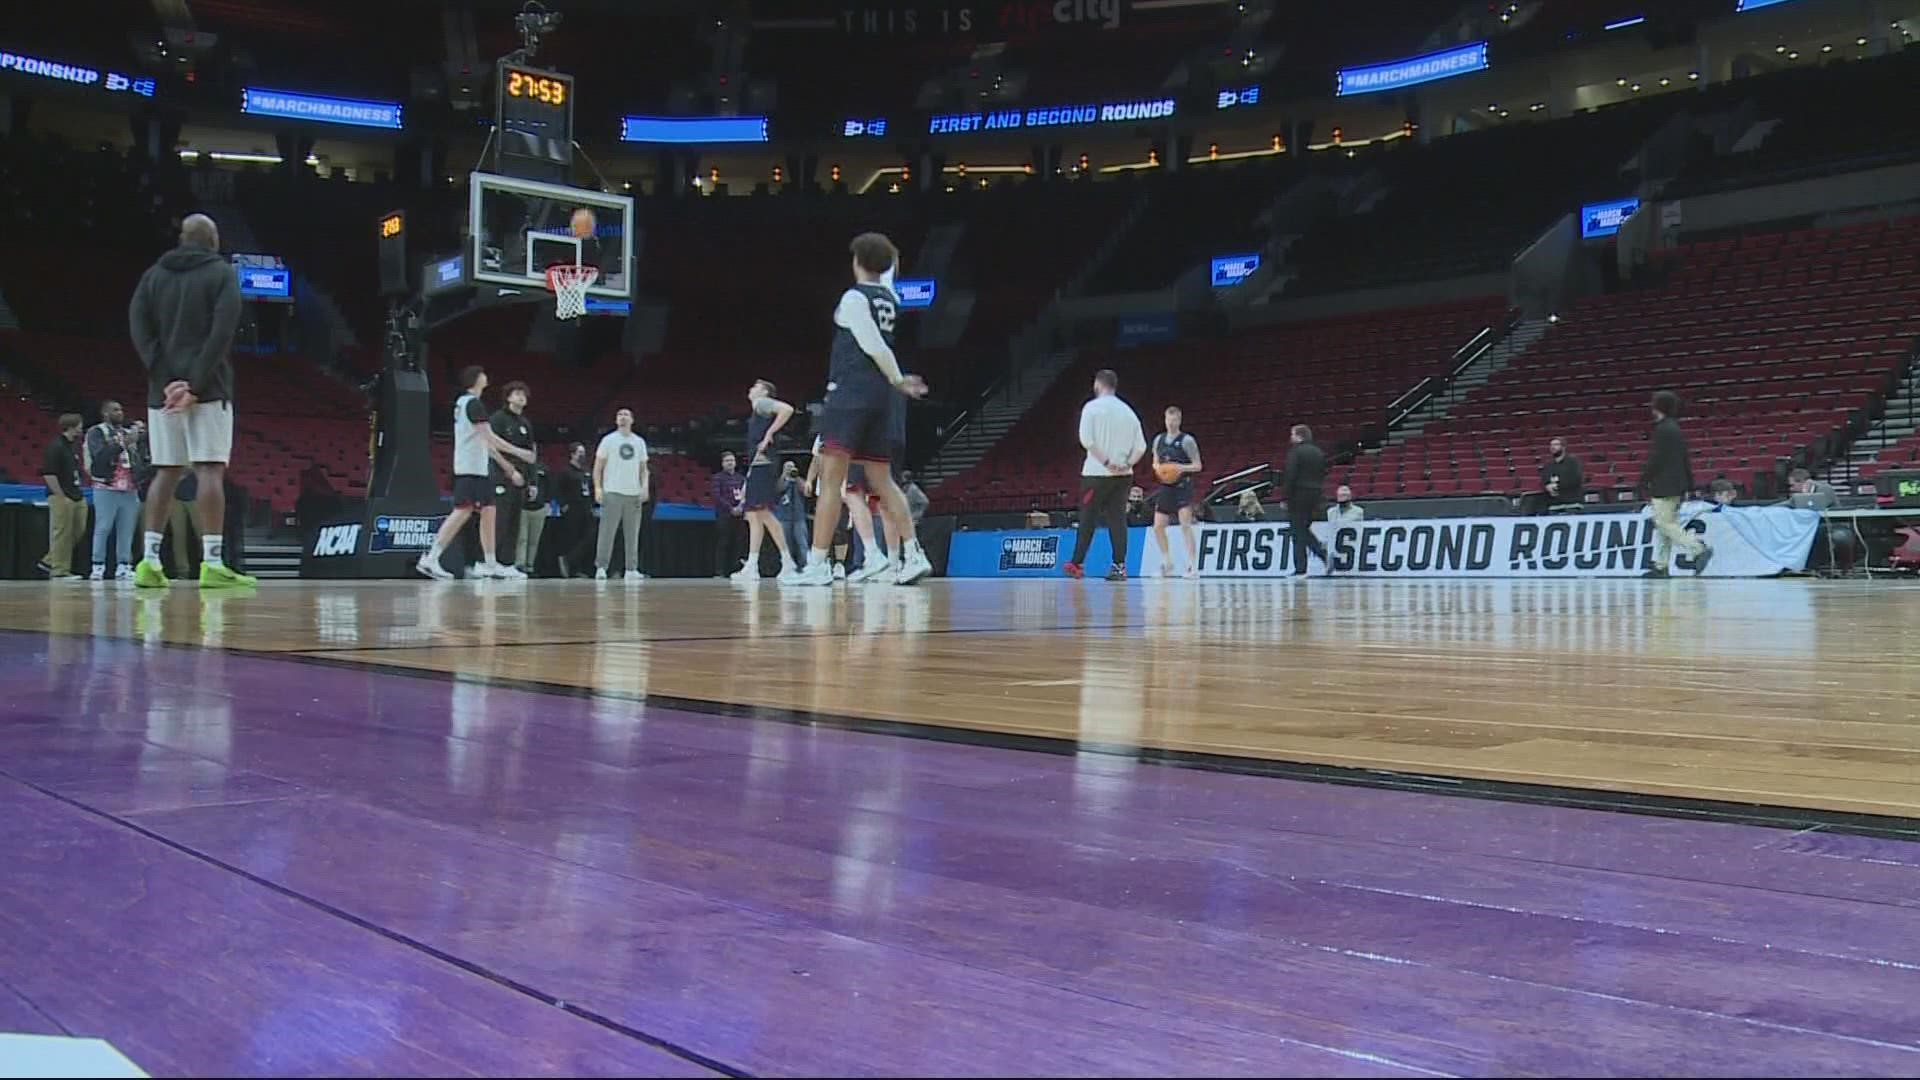 The tournament tips off Thursday afternoon. Teams are already in town and spent the day preparing for their games at the Moda Center.